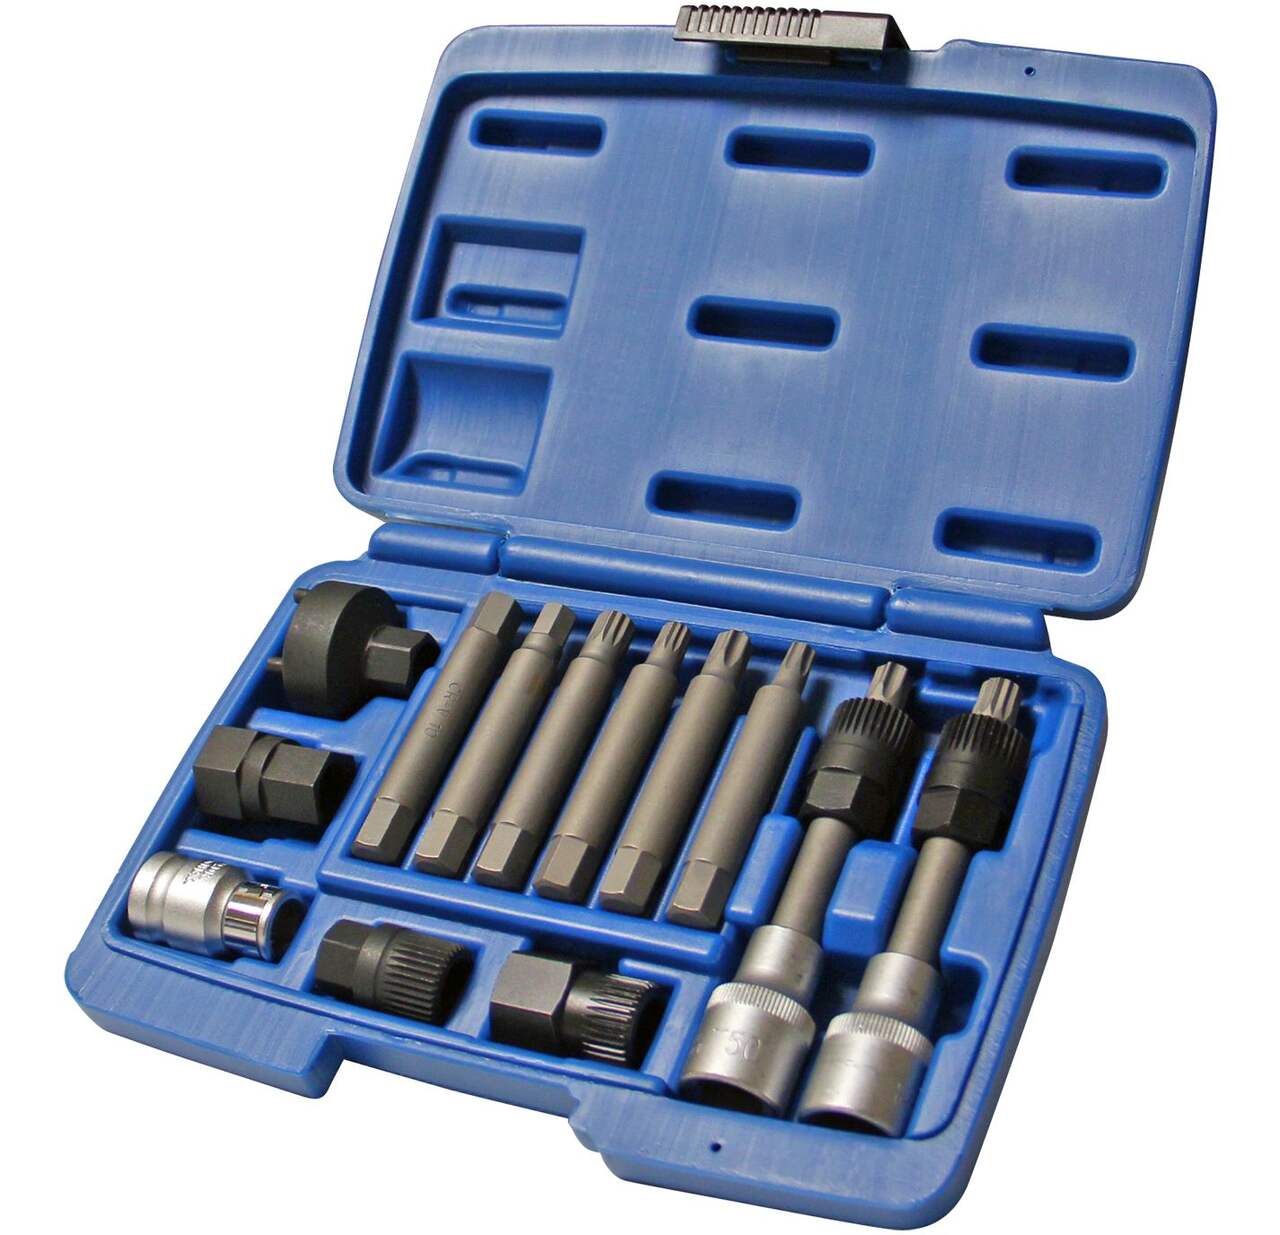 https://media-www.canadiantire.ca/product/automotive/heavy-auto-parts/auto-heating-cooling-parts/0149815/93877-oap-installation-tool-kit--0c4d1c77-9348-40e3-9669-adeff972f22b-jpgrendition.jpg?imdensity=1&imwidth=640&impolicy=mZoom